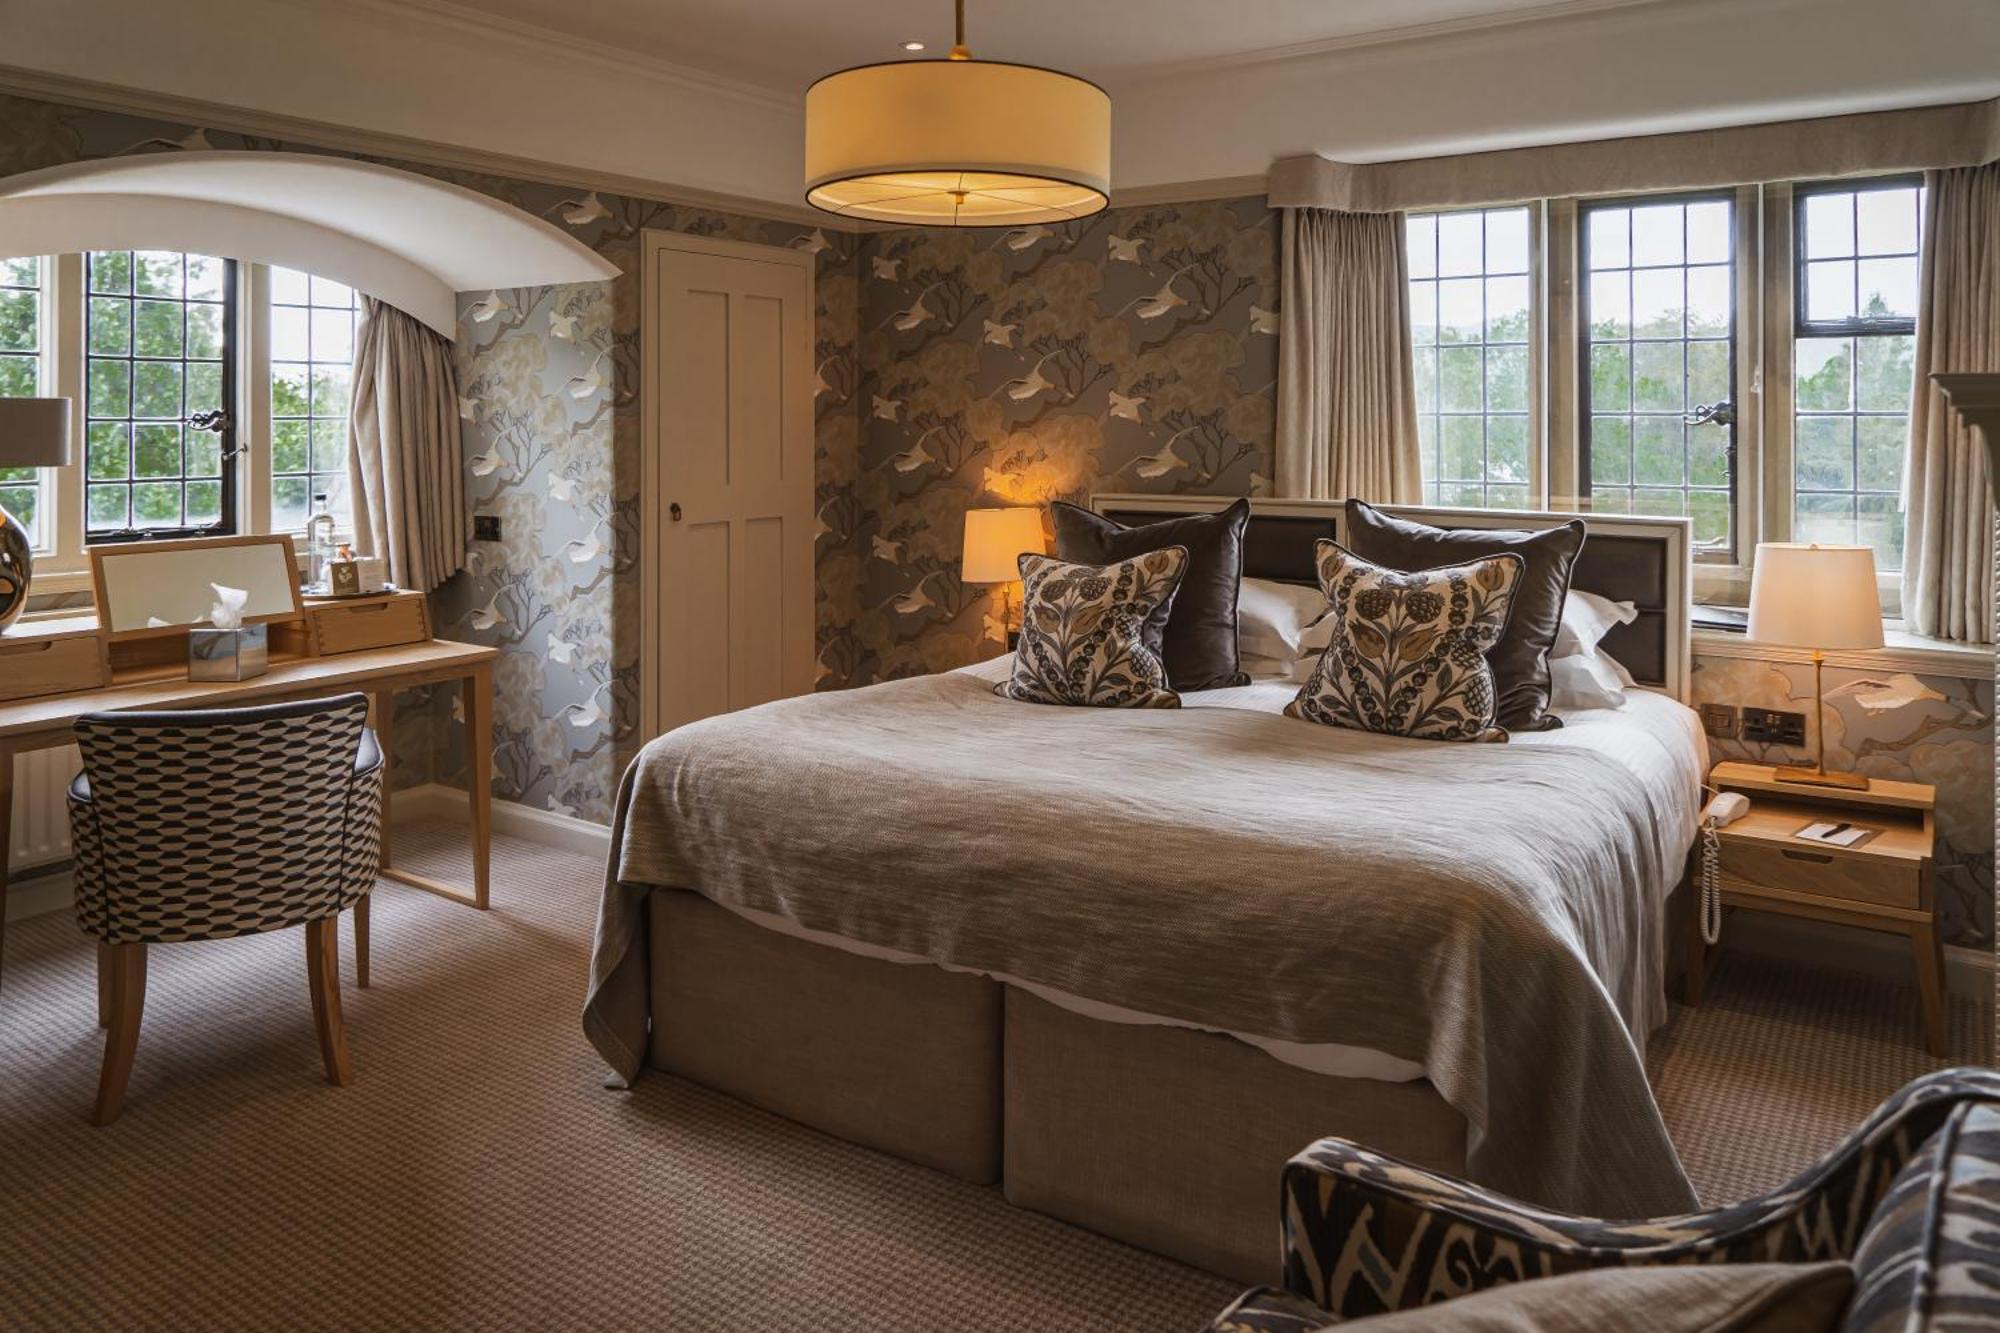 Cragwood Country House Hotel Windermere Extérieur photo